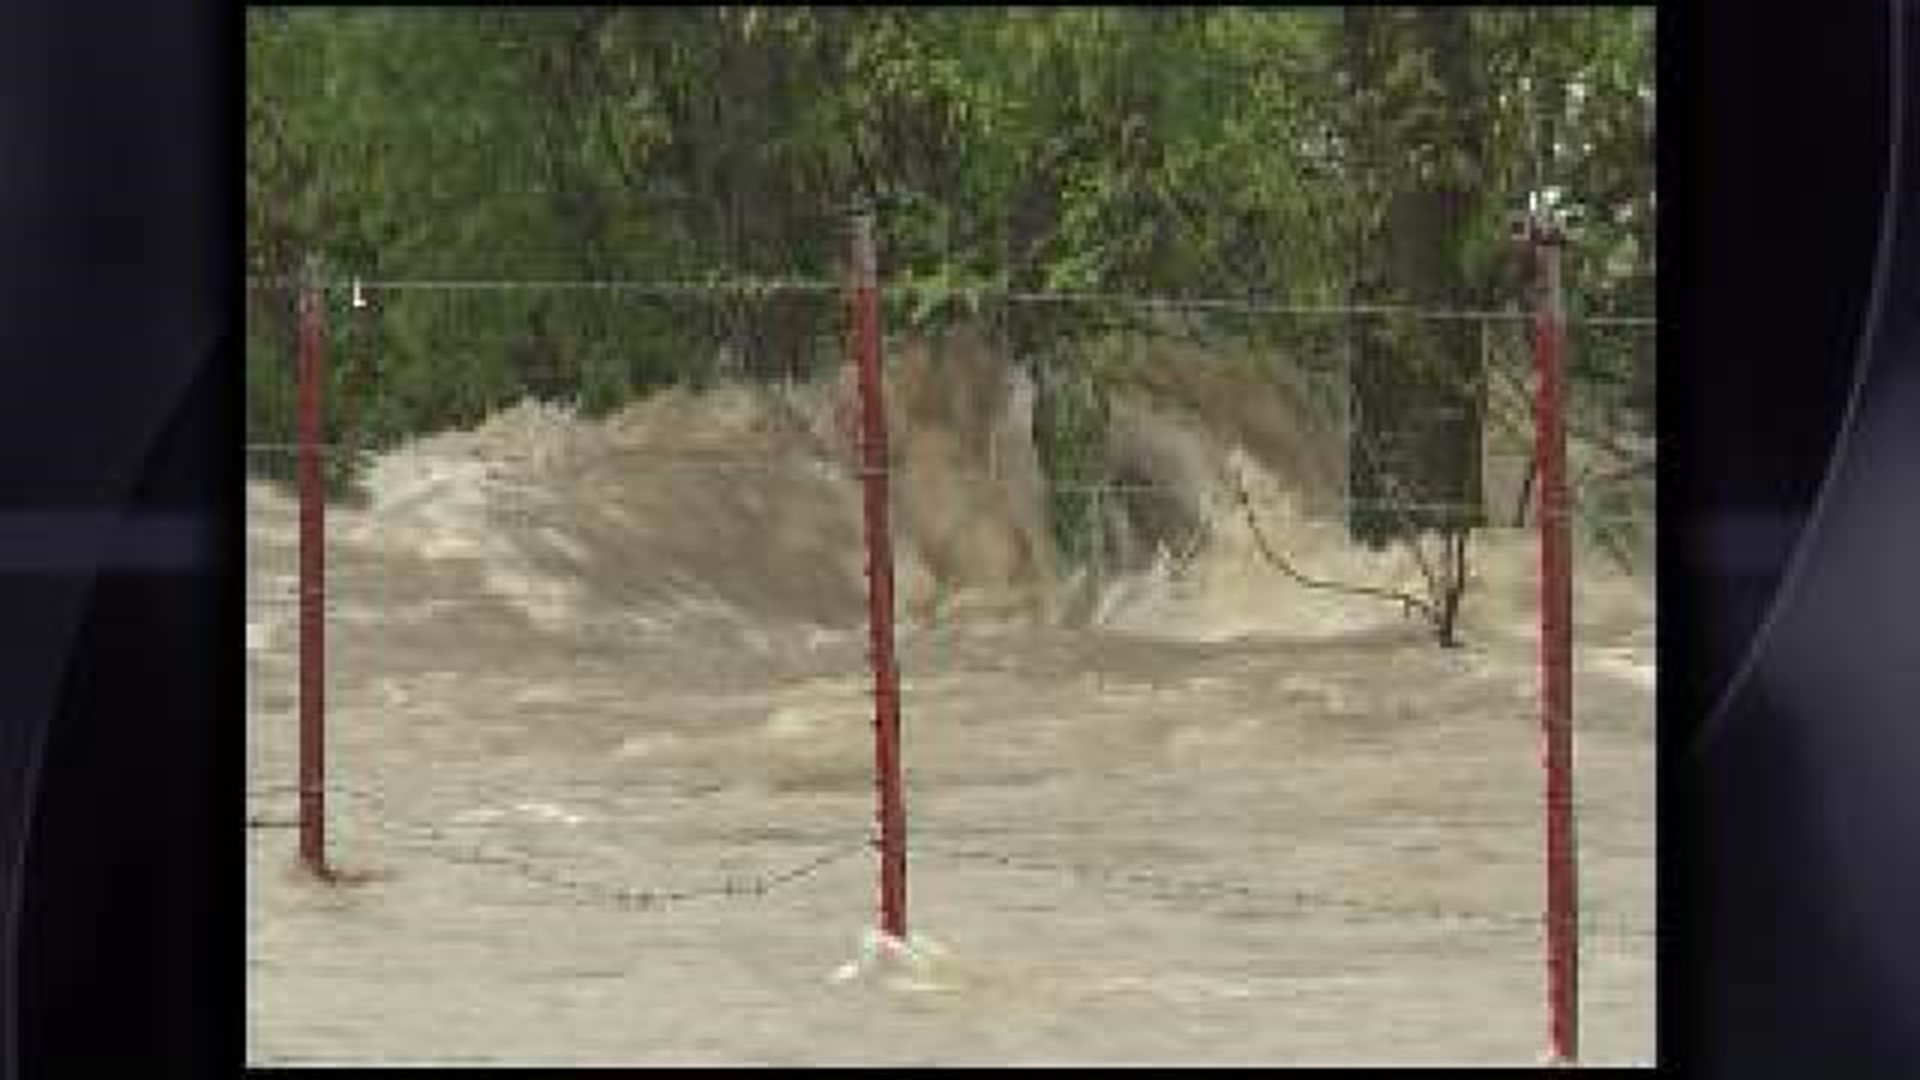 The City of Johnson Prepares for Flooding